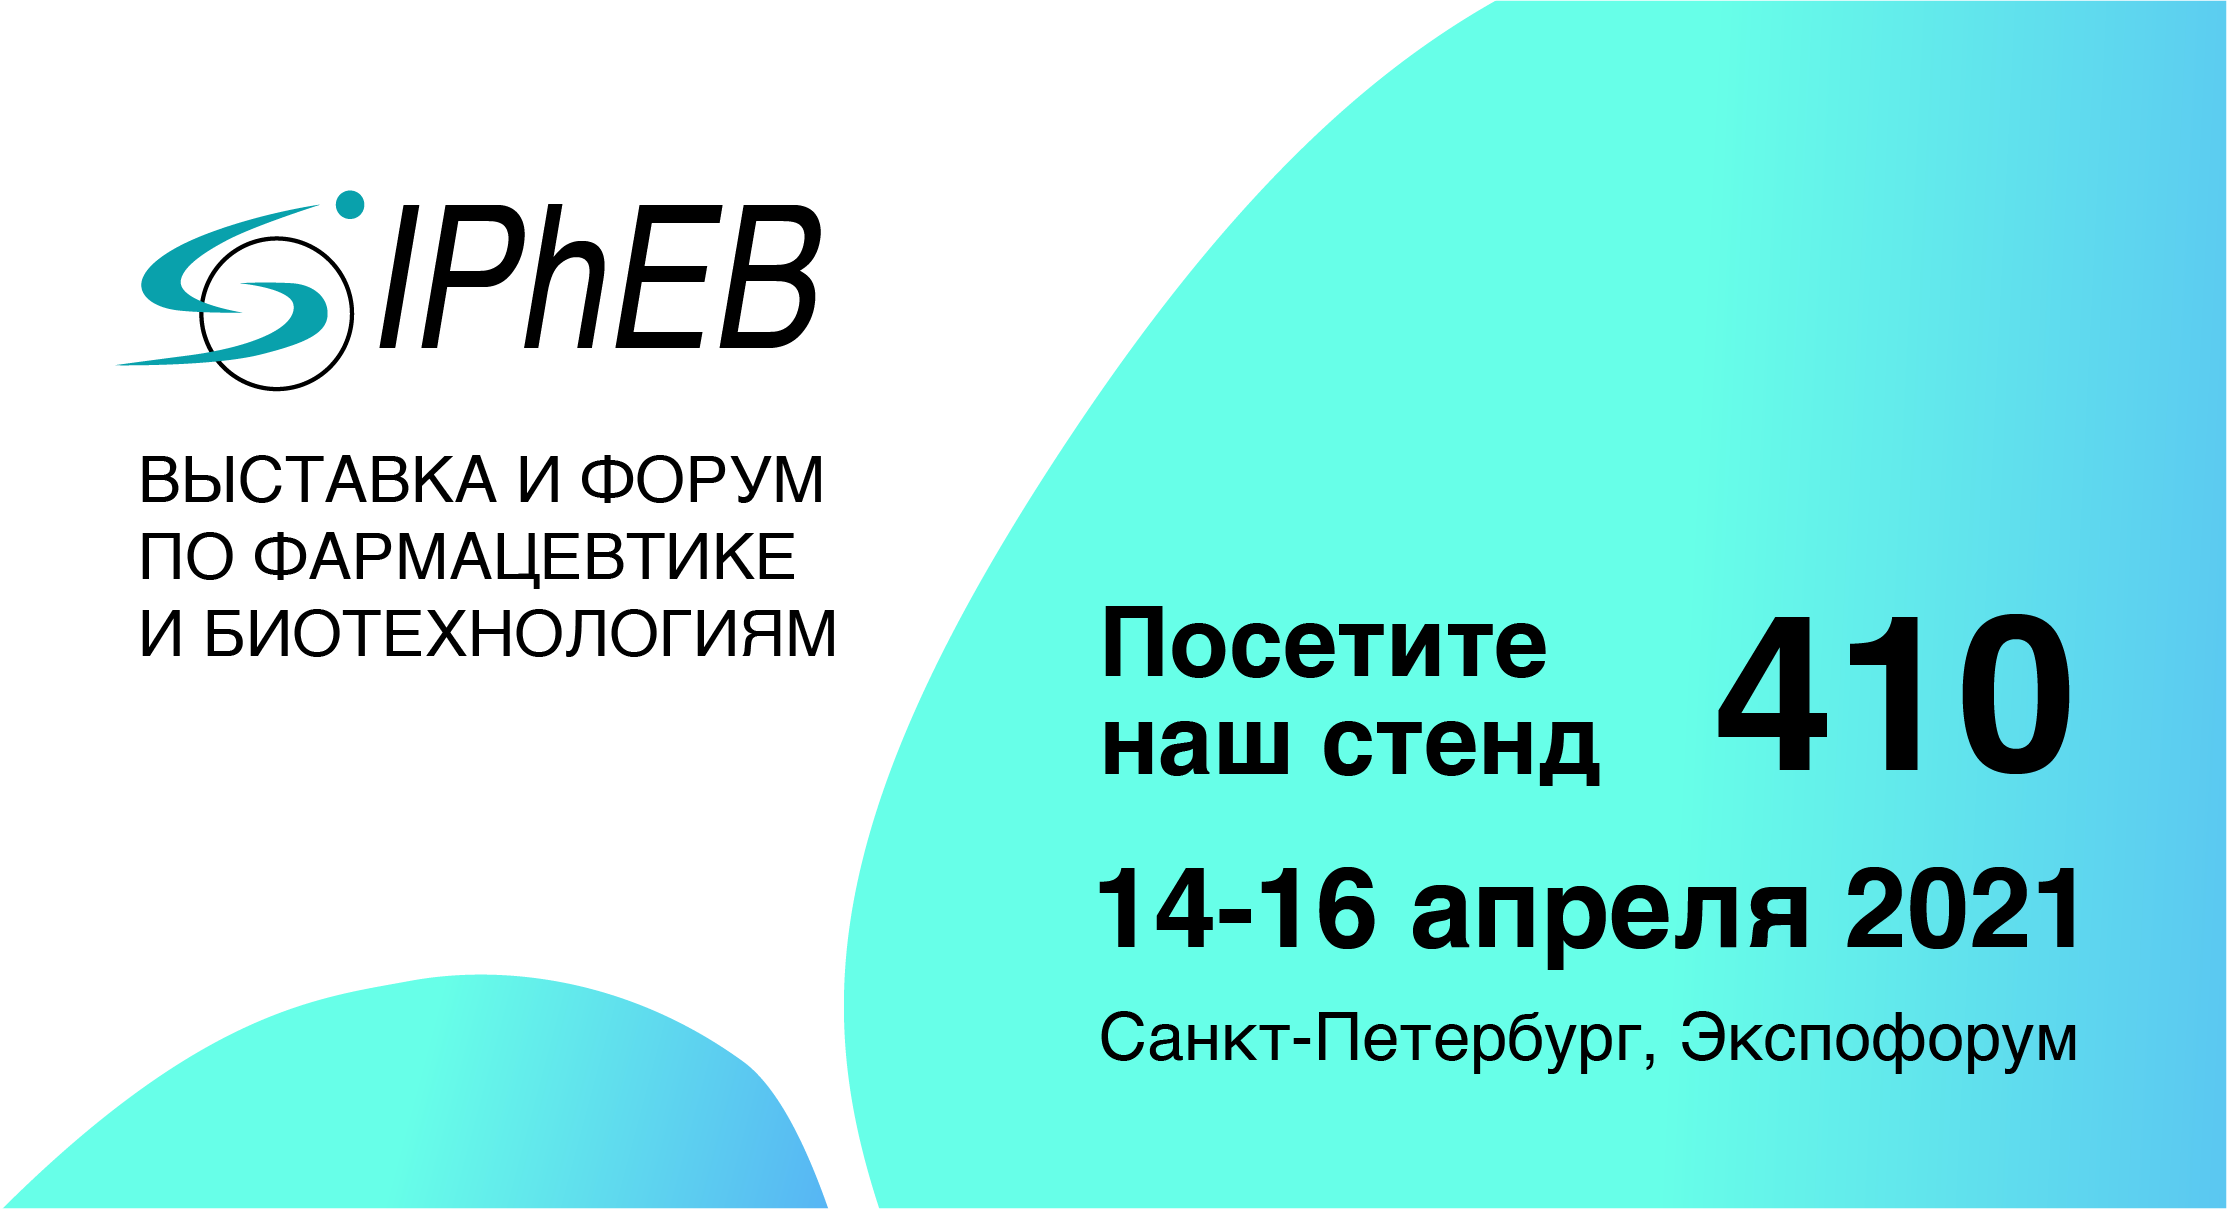  BRIGHT WAY GROUP invites you to visit our stand at the International Exhibition and Forum on Pharmaceuticals and Biotechnology PhEB Russia, St. Petersburg